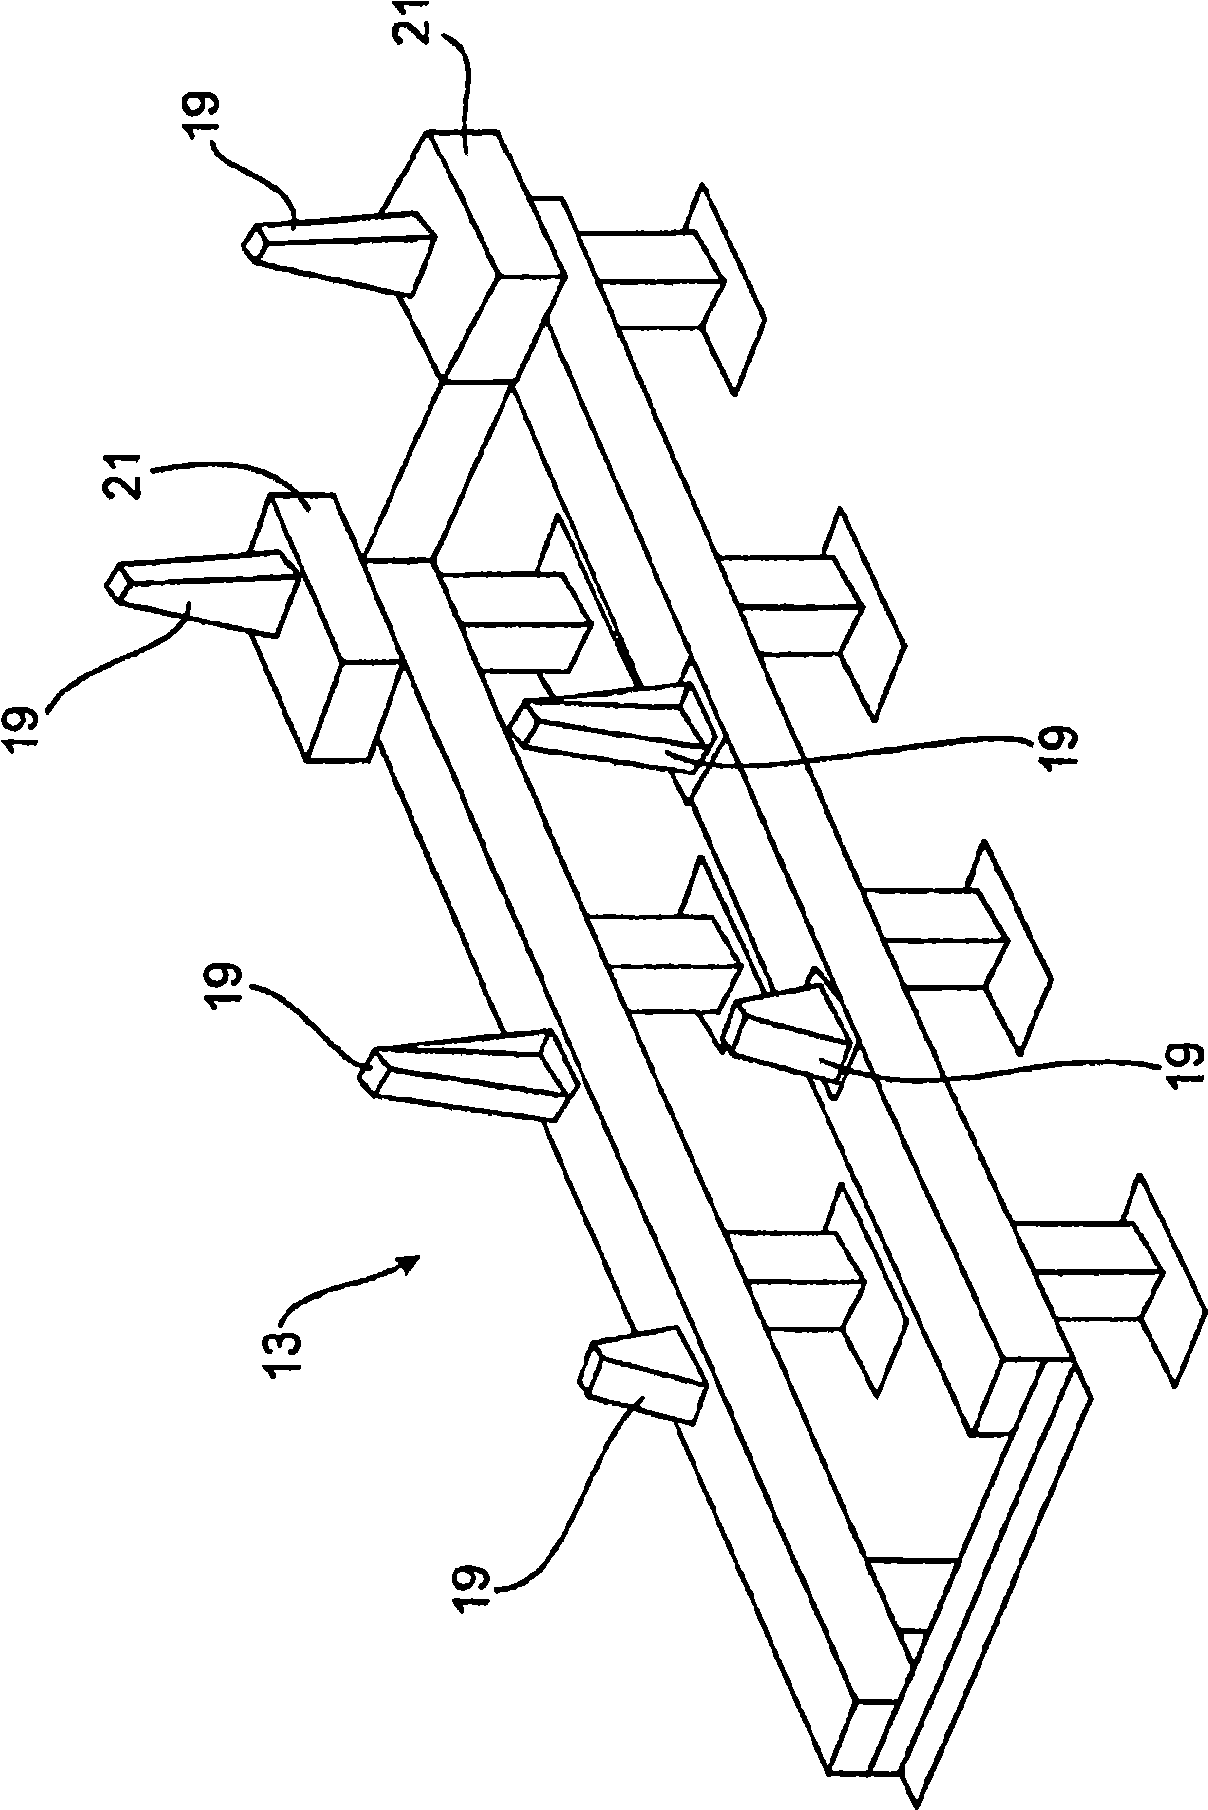 Work station for joining body parts of a motor vehicle, assembly line comprising such a work station, and method for delivering/replacing clamping frames in a work station